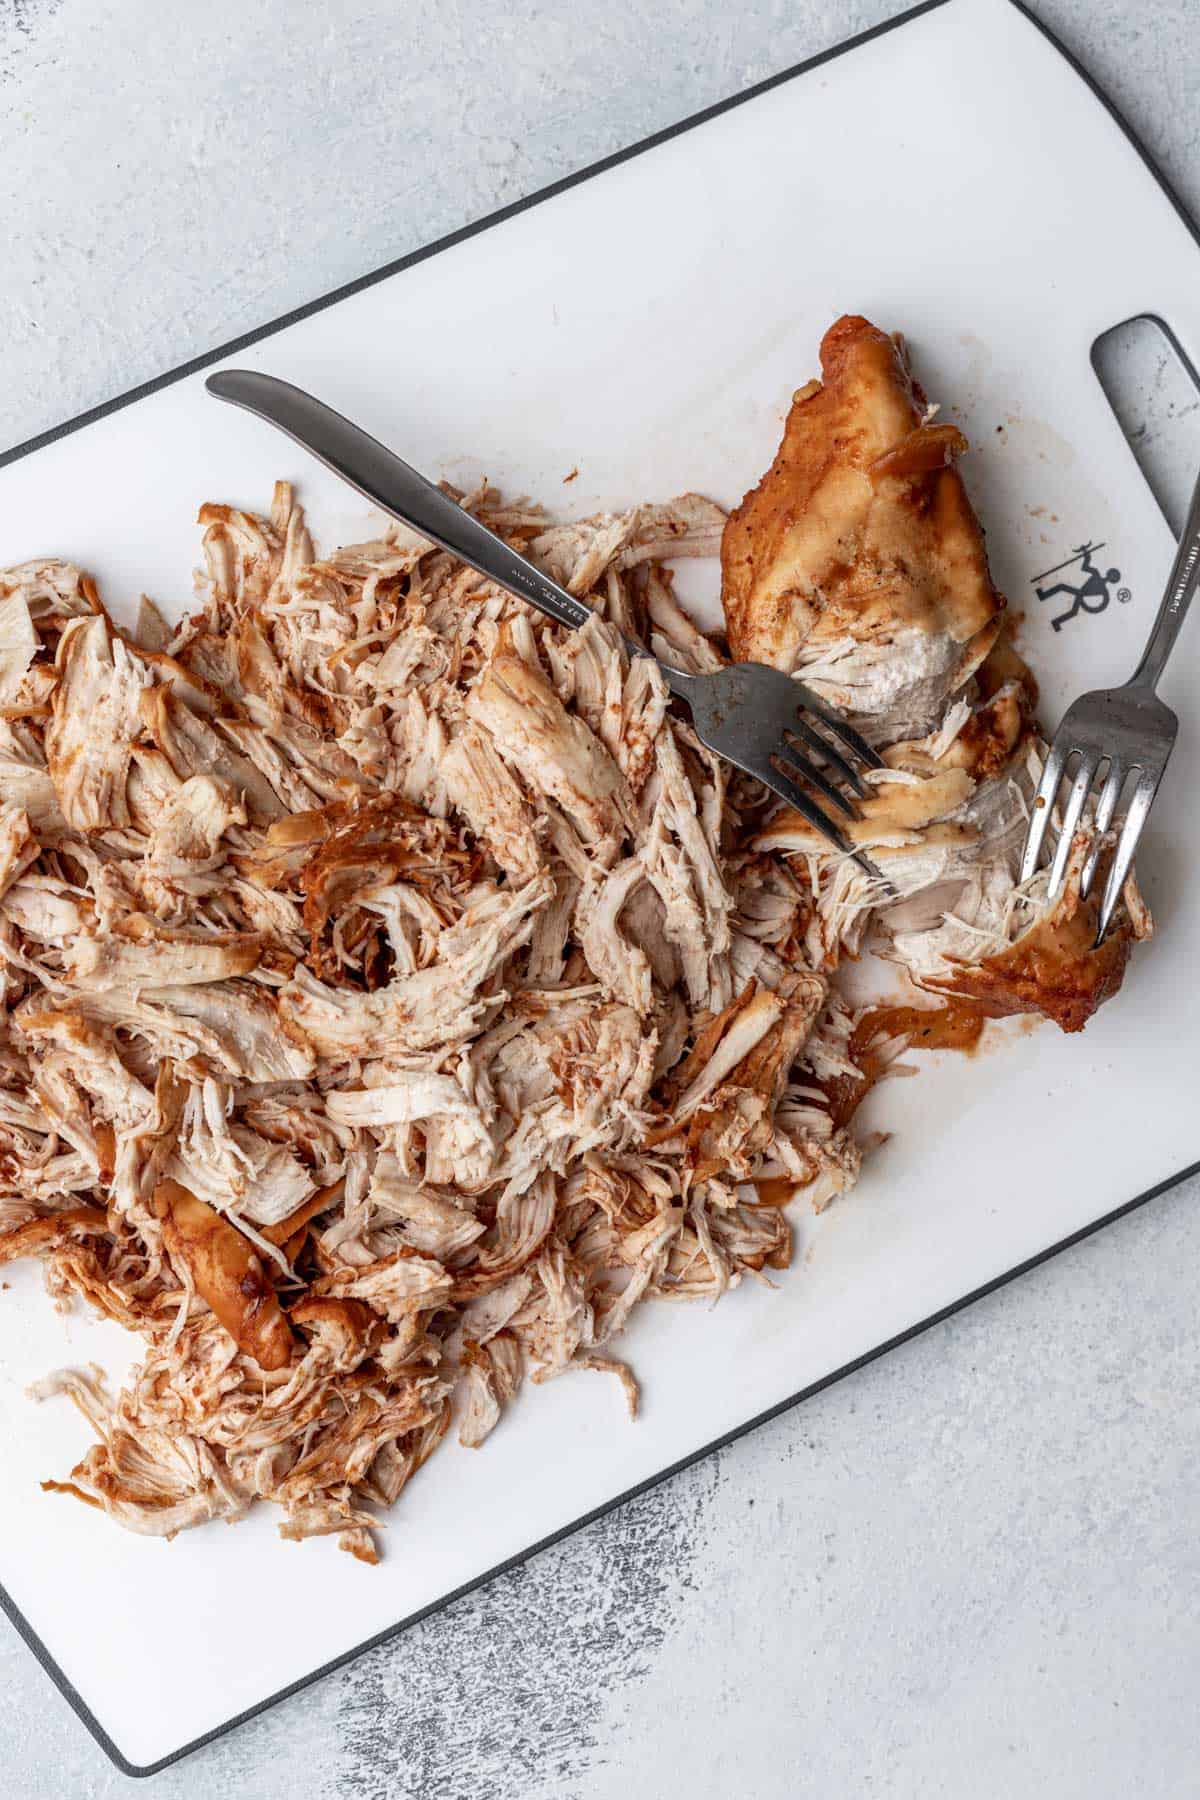 Chicken on a cutting board shredded with two forks.